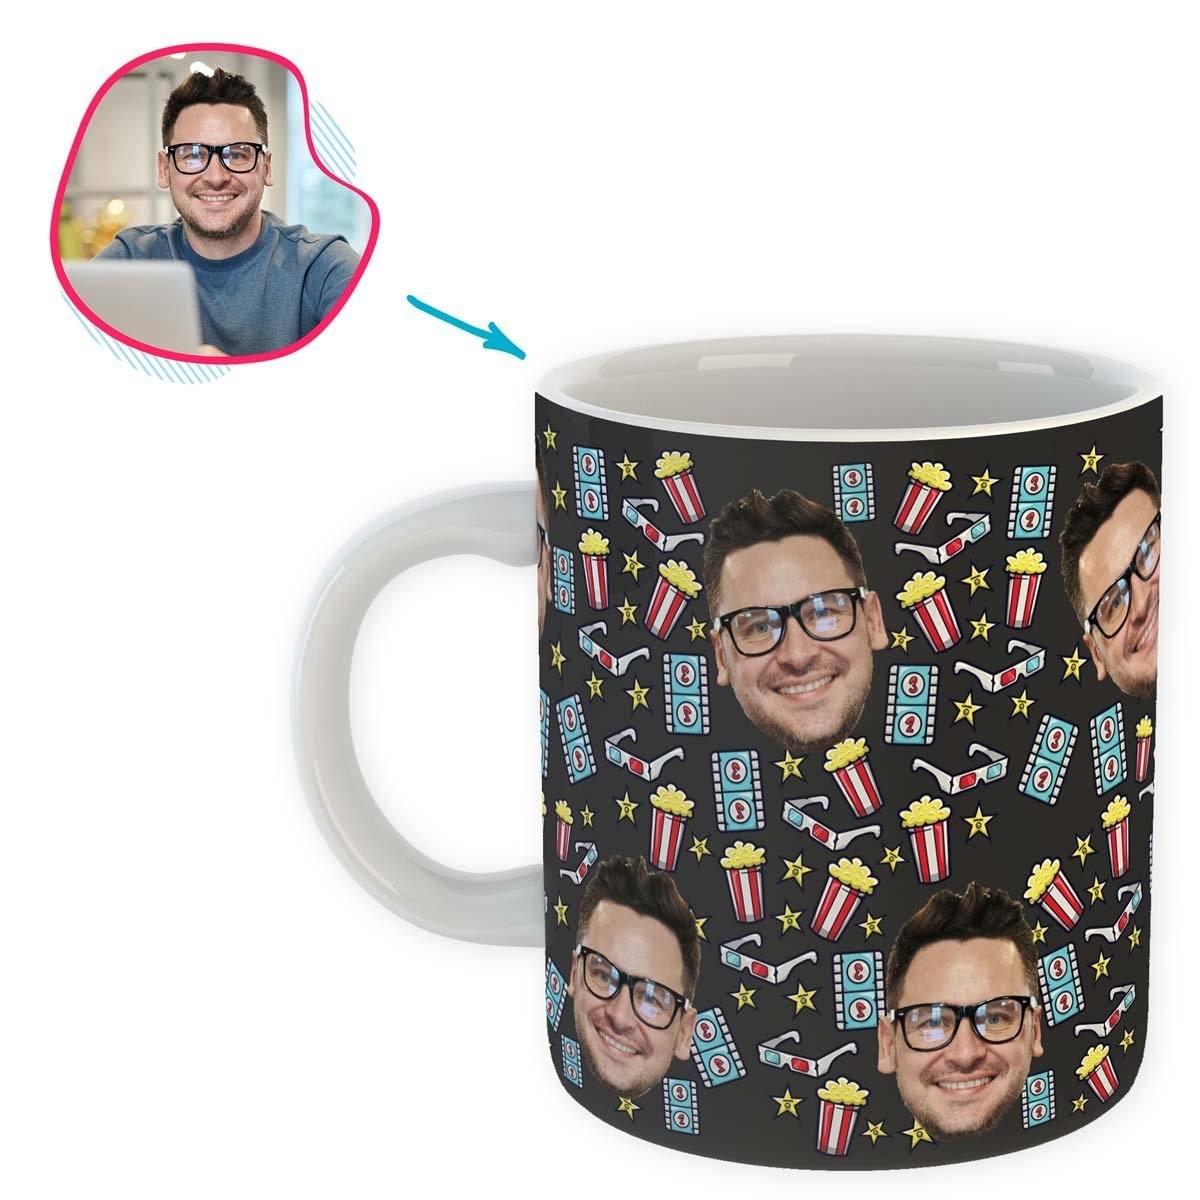 dark Movie mug personalized with photo of face printed on it